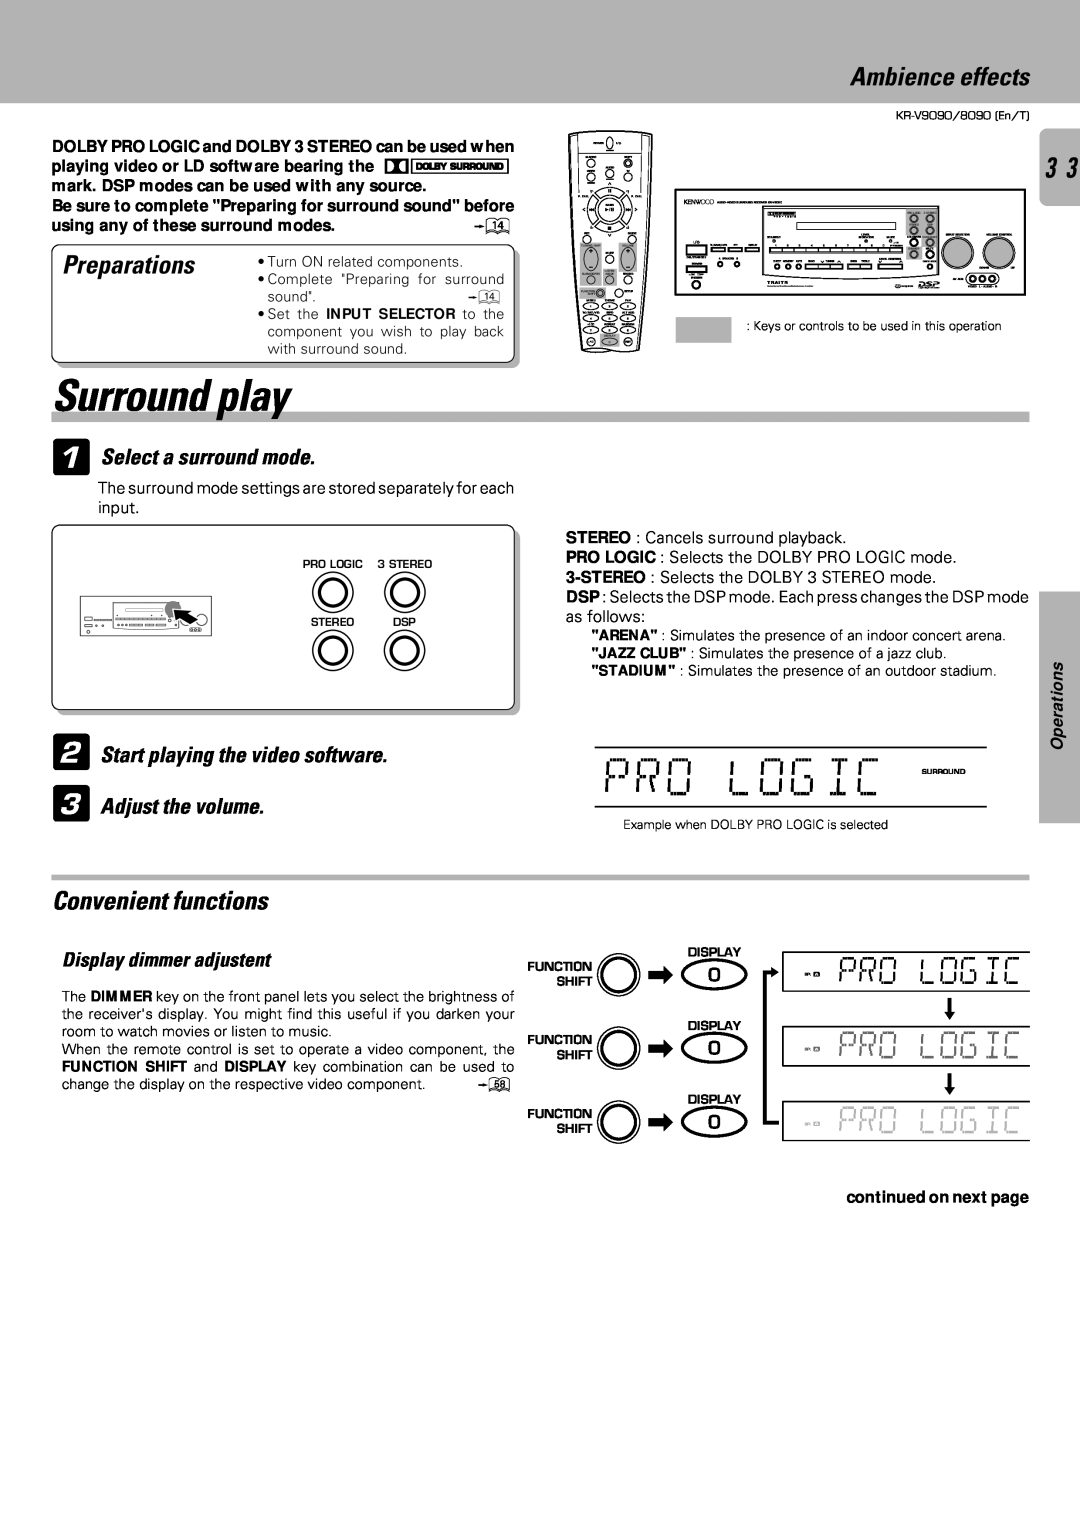 Kenwood KR-V8090 Pro Logic Surround, Surround play, Sp. A Pro Logic, Ambience effects, Preparations, Convenient functions 